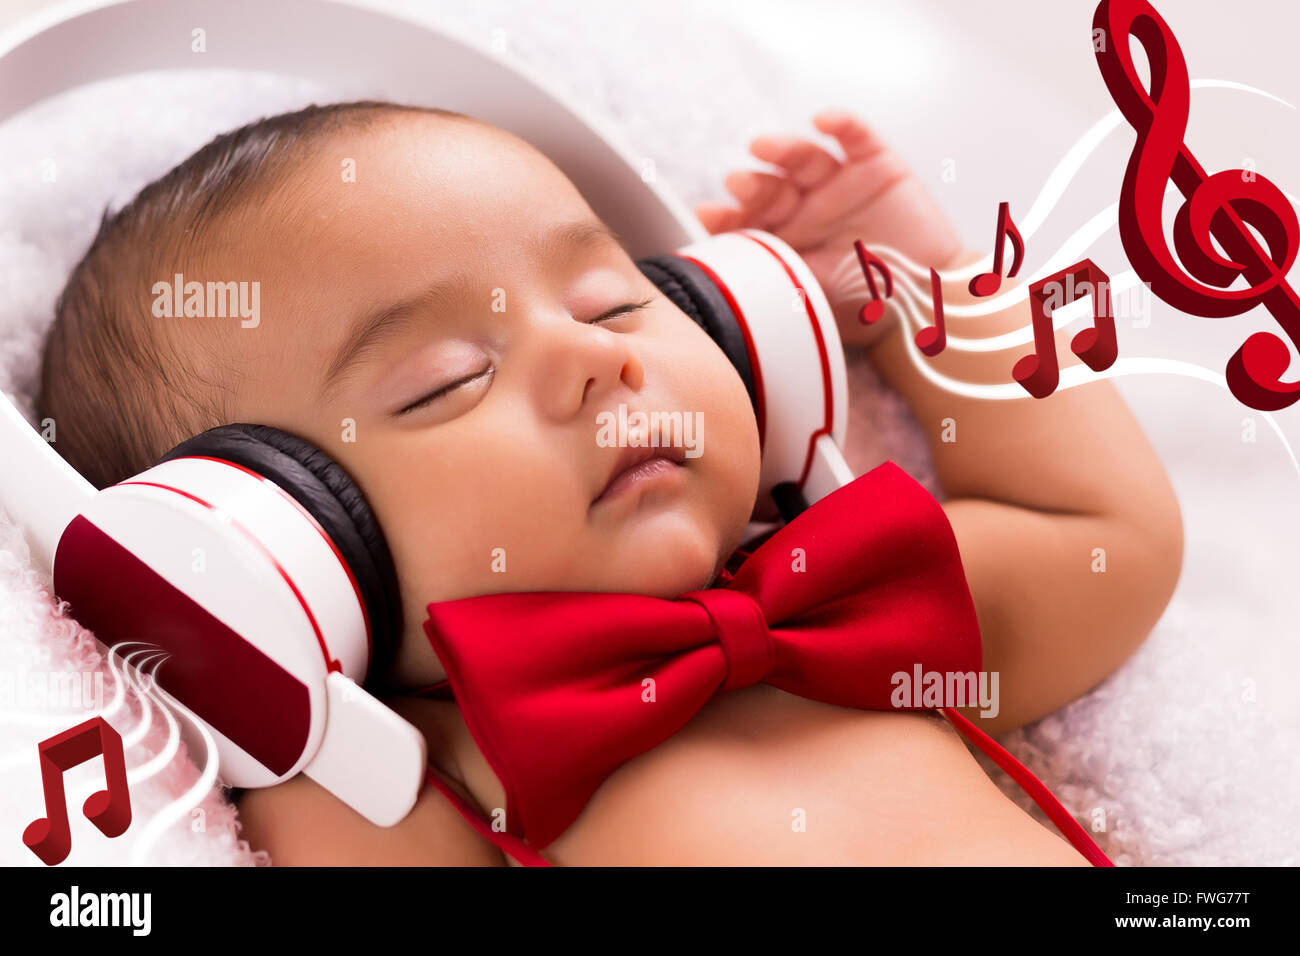 beautiful baby two months old relaxed listening music with headphones, using a vintage red tie Stock Photo